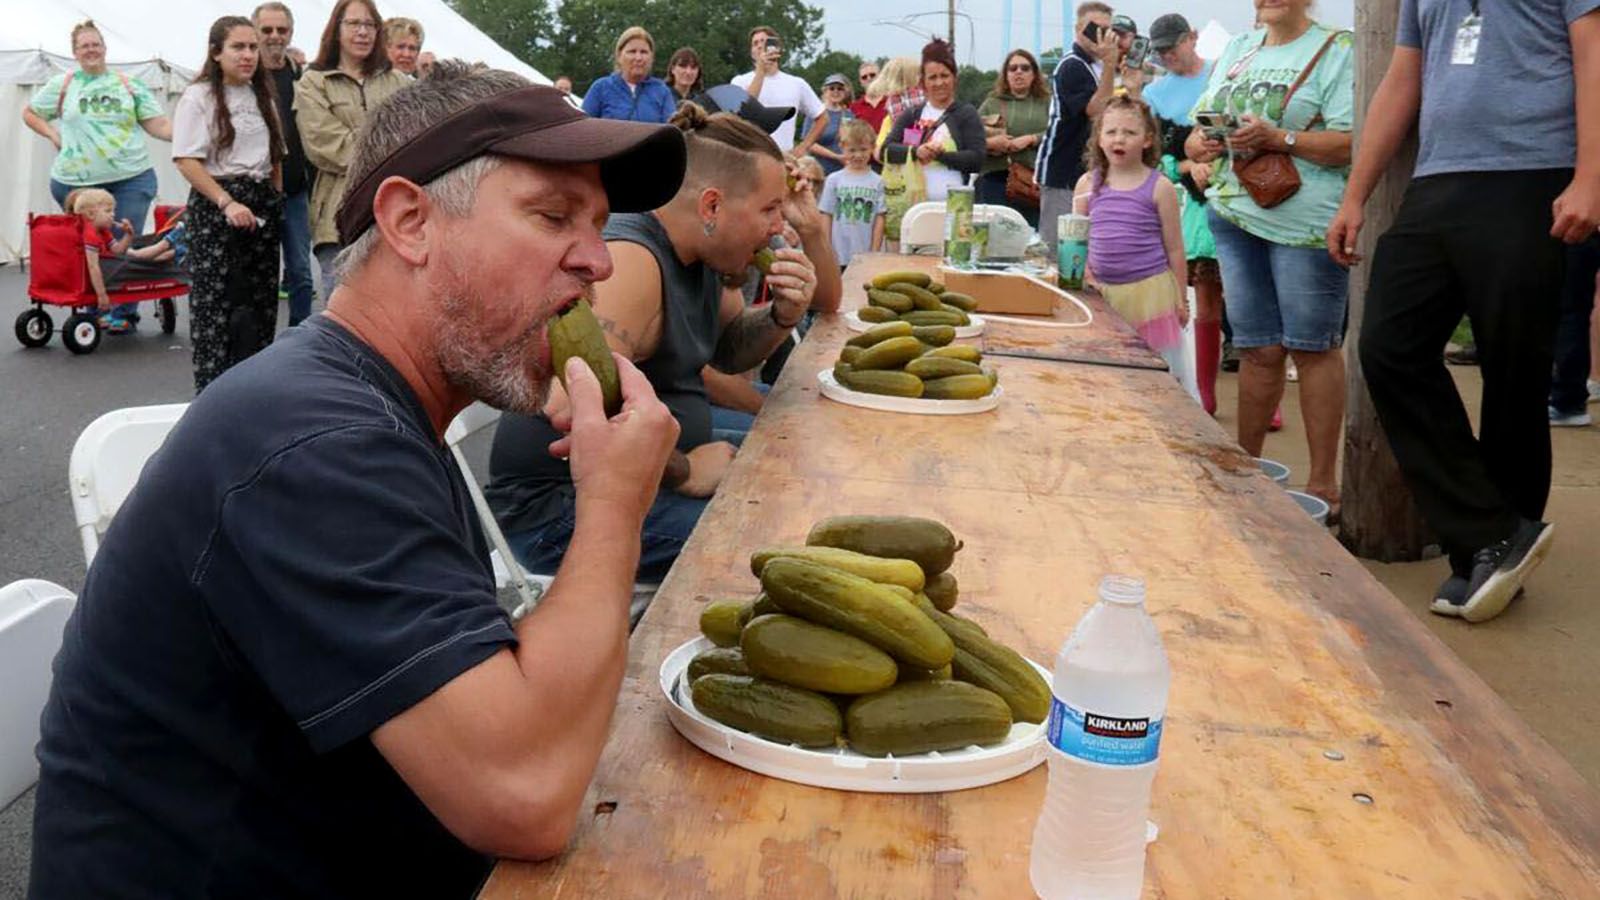 The pickle-eating contest returns to the St. Joe Pickle Festival on Saturday, July 20.